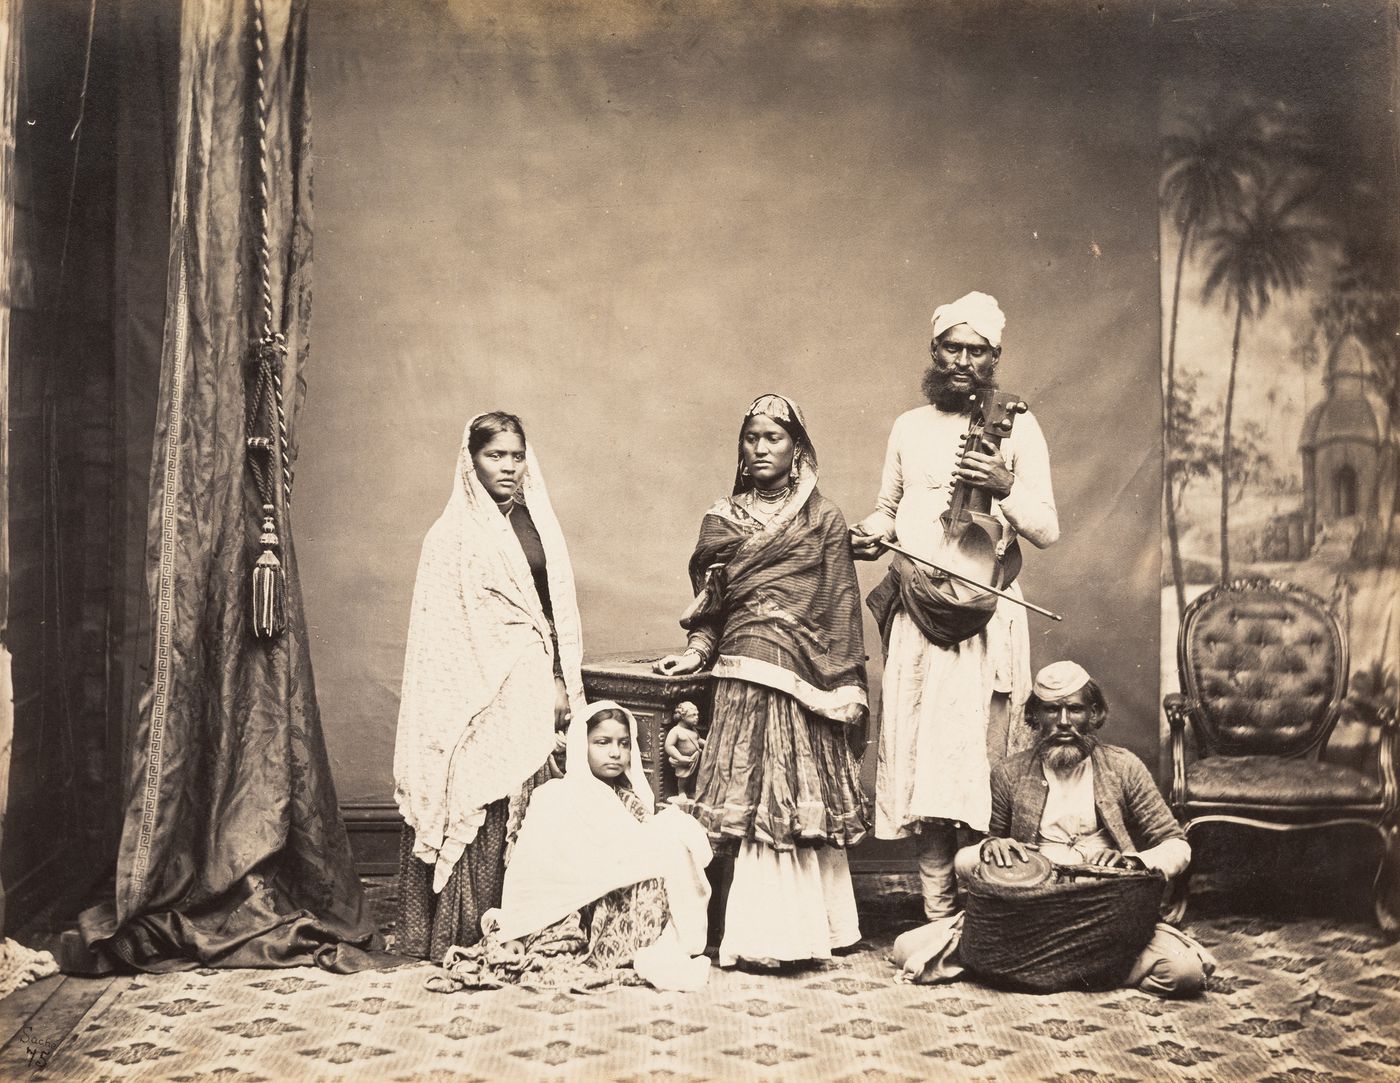 View of five Indian Nautch performing artists in a studio, Calcutta, India